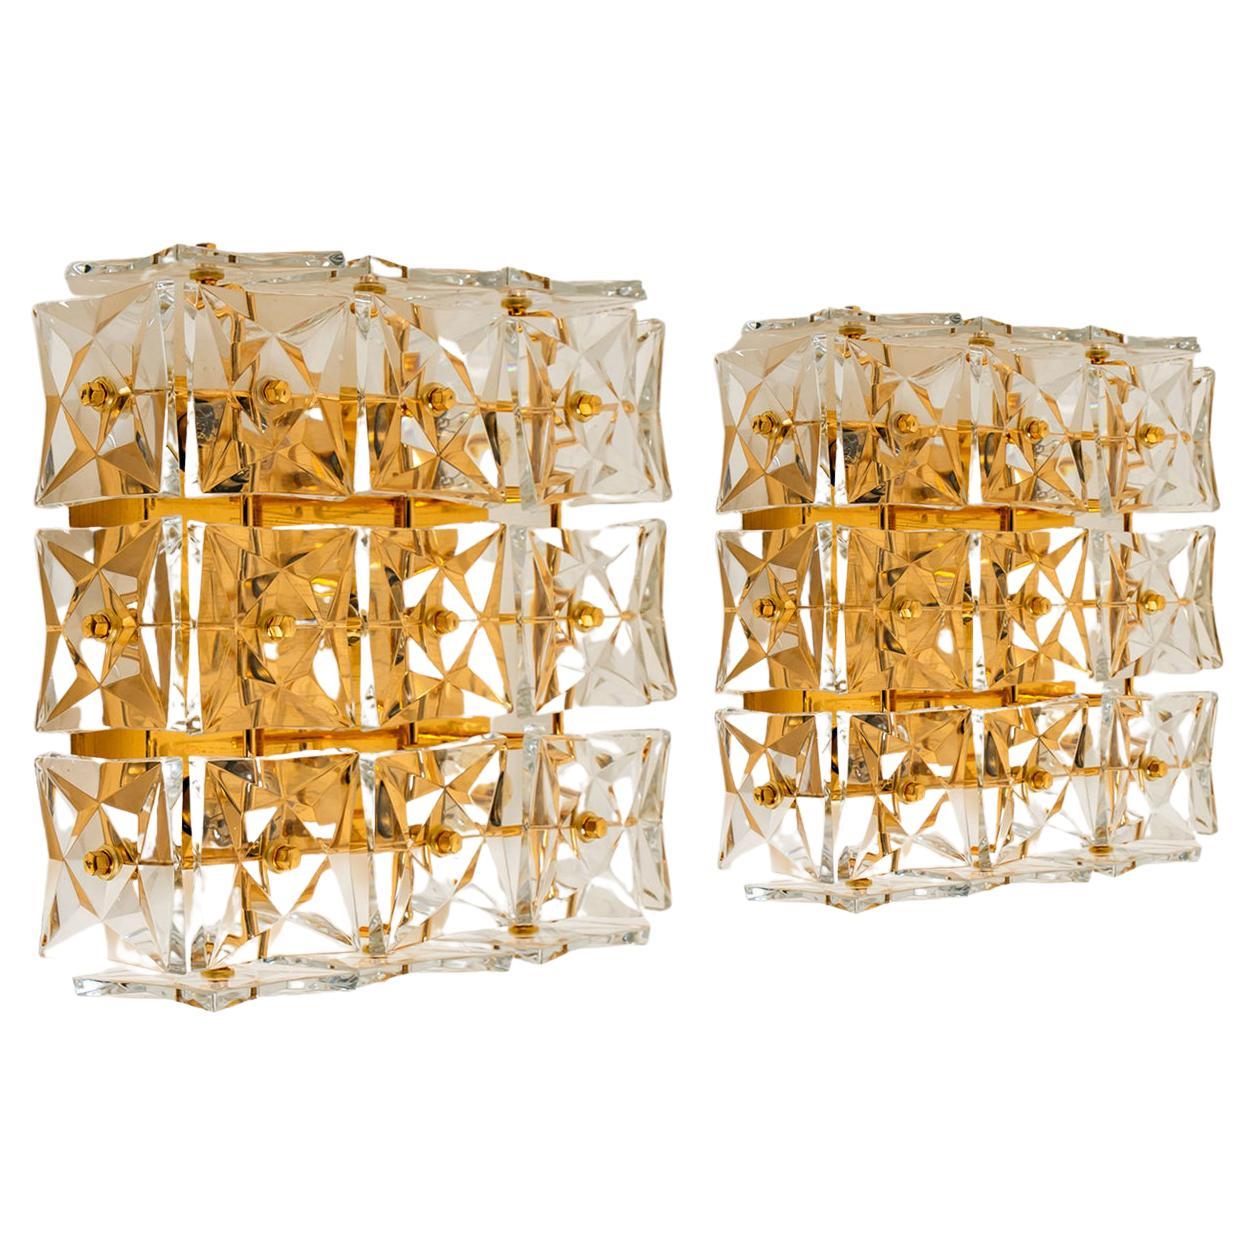 1 of the 2 Gold-Plated Kinkeldey Crystal Glass Wall Lights or Flush Mount 1970s For Sale